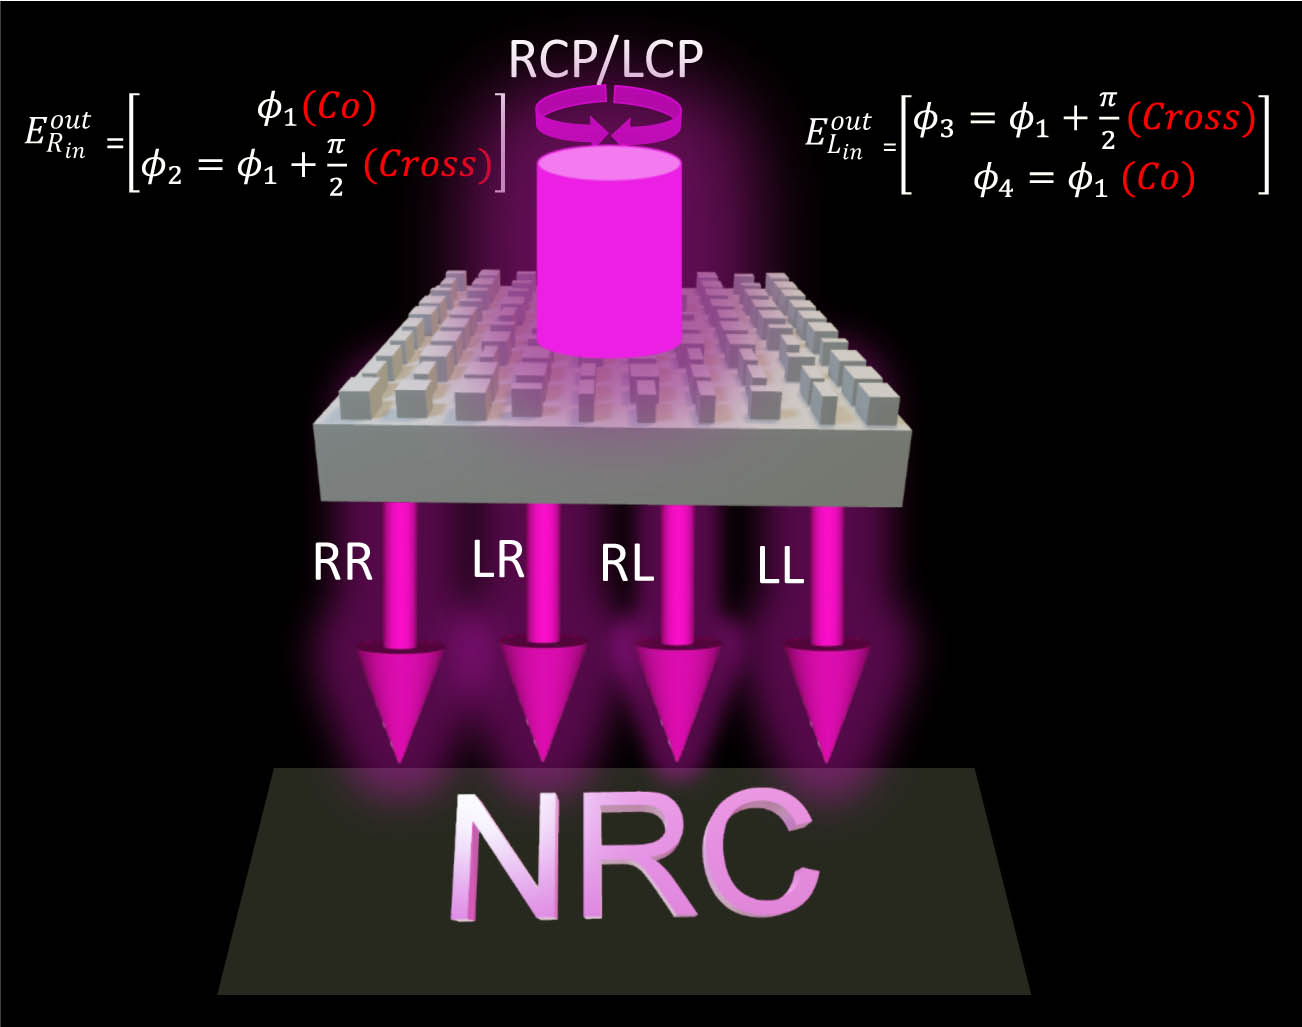 Schematic illustration of spin-insensitive meta-hologram. The proposed scheme reconstructs the identical image “NRC” regardless of the spin of the incident and transmitted light.